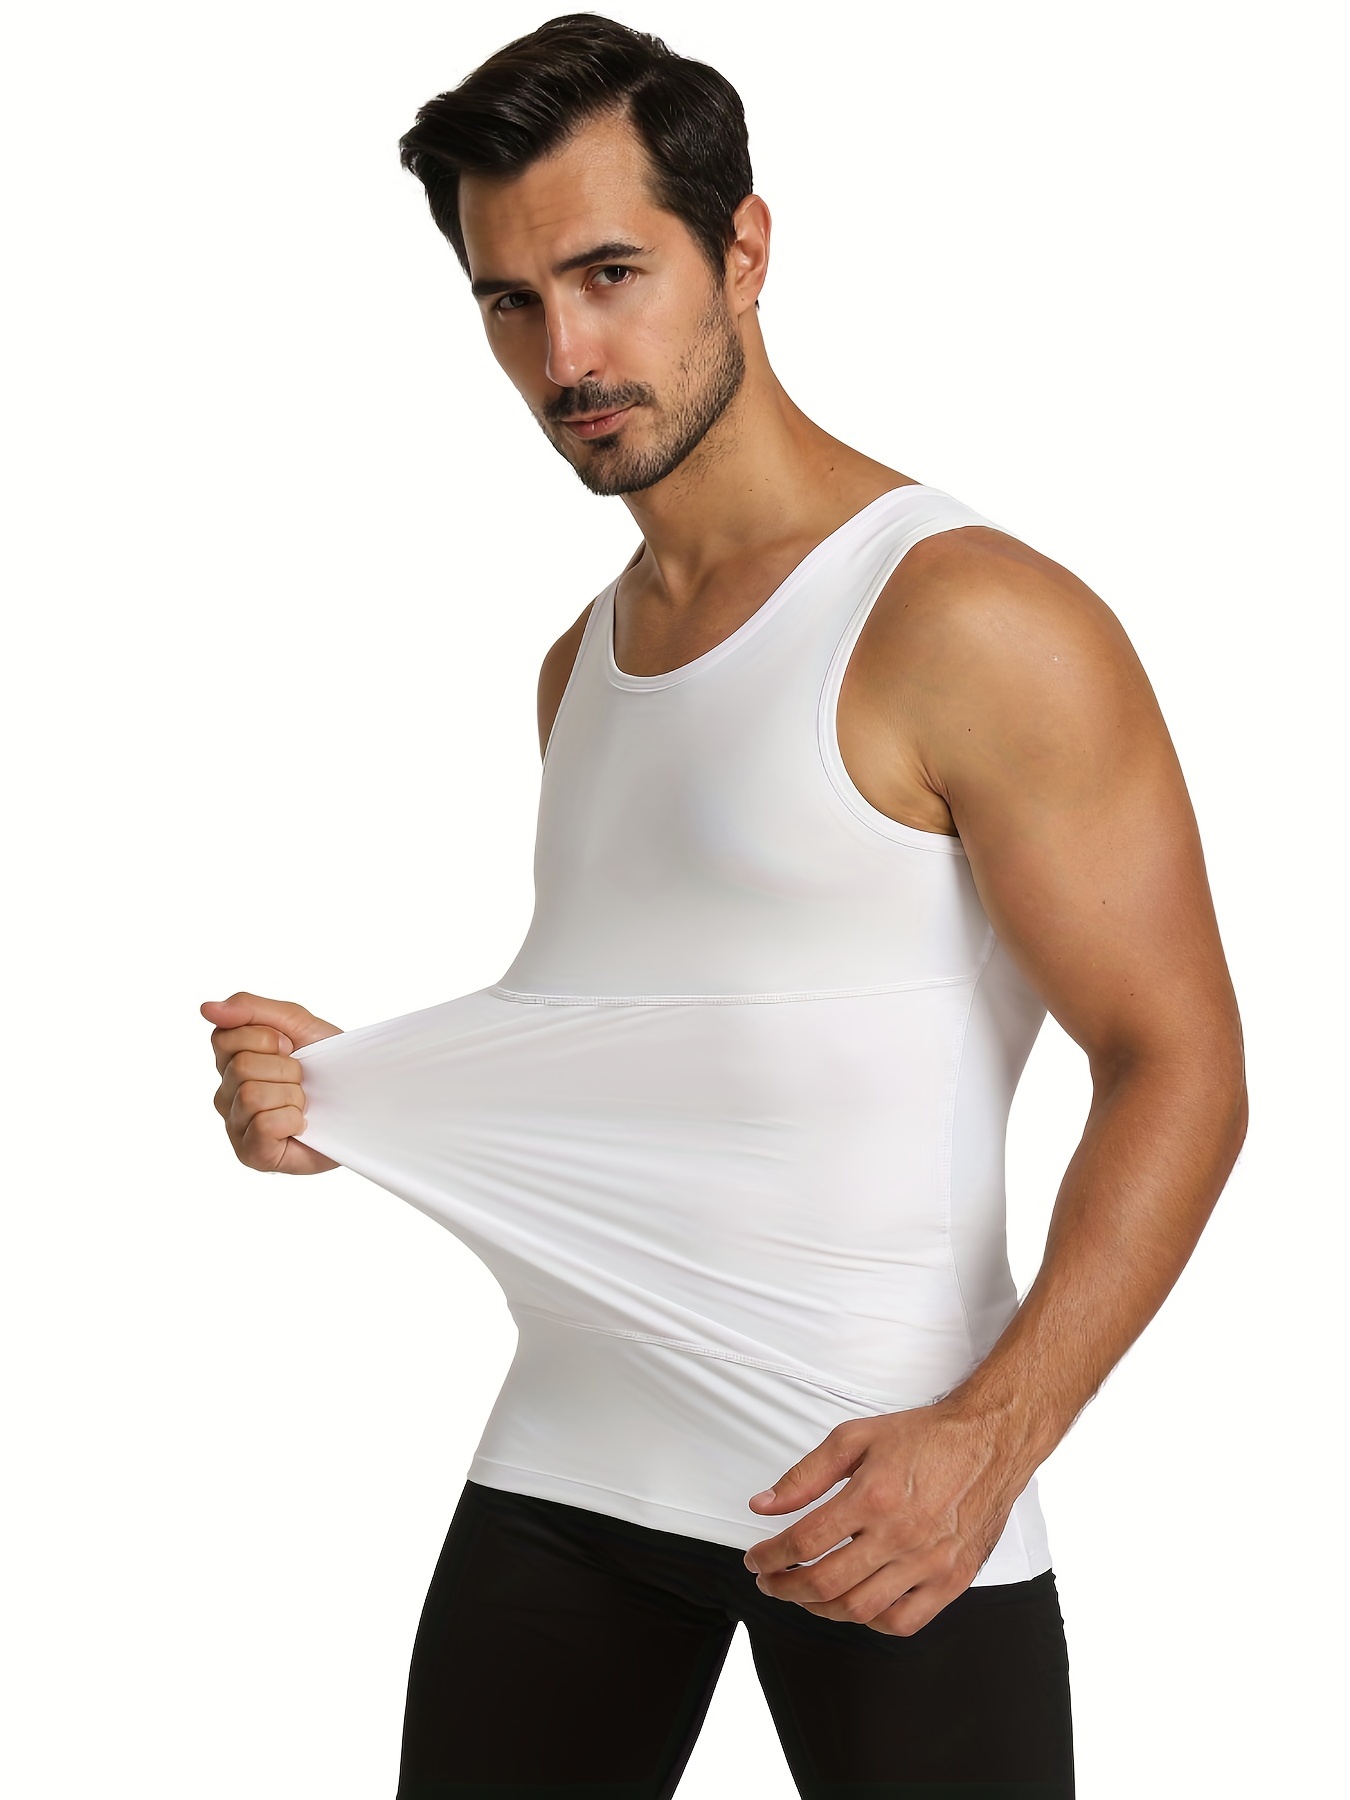 Men Shapewear Slimming Body Shaper Compressed Shirt Tank Top With